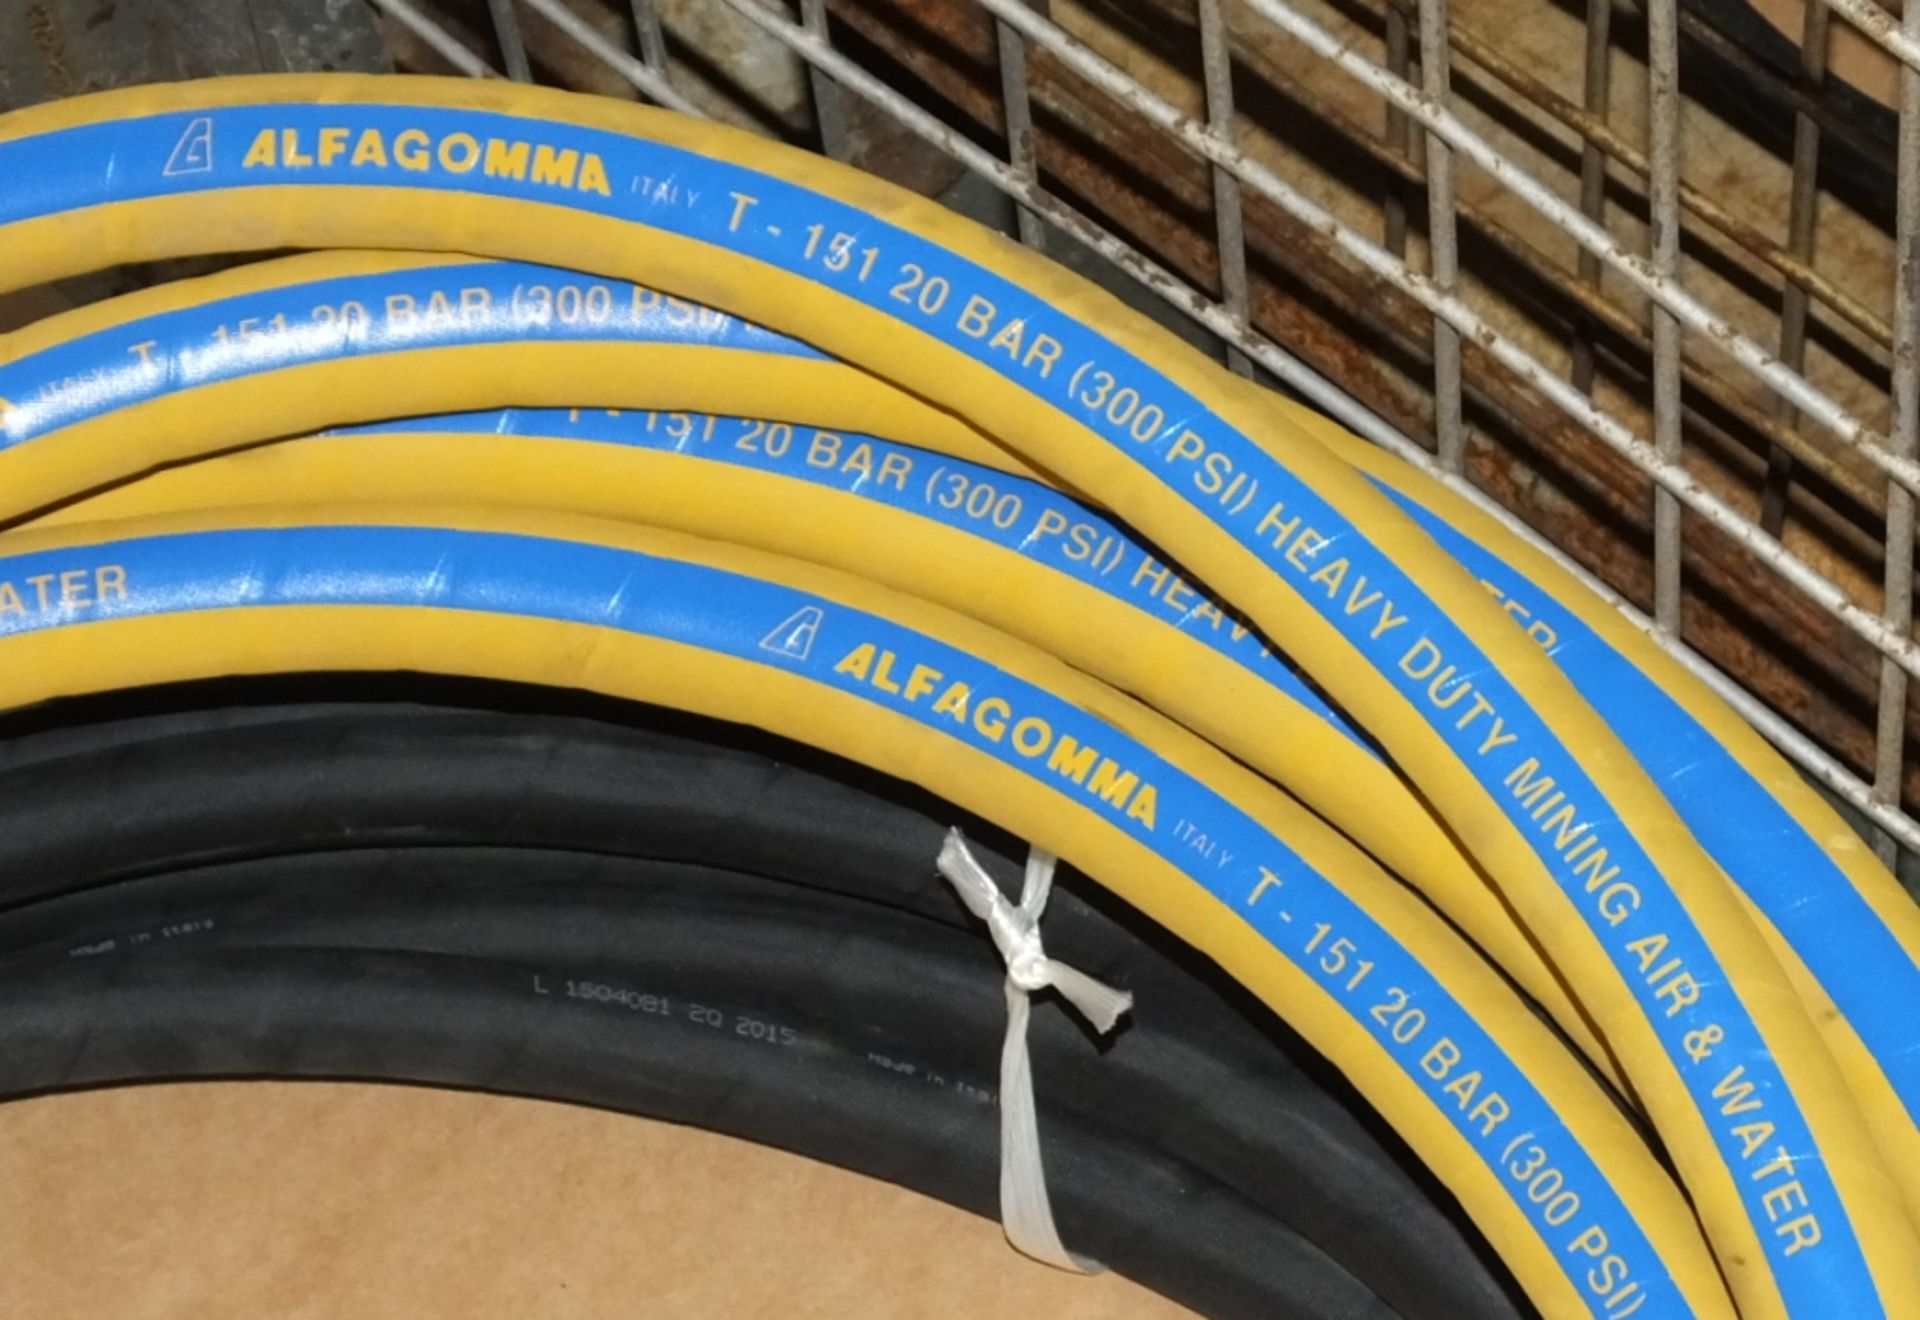 7x Rubber Hoses - Image 3 of 5